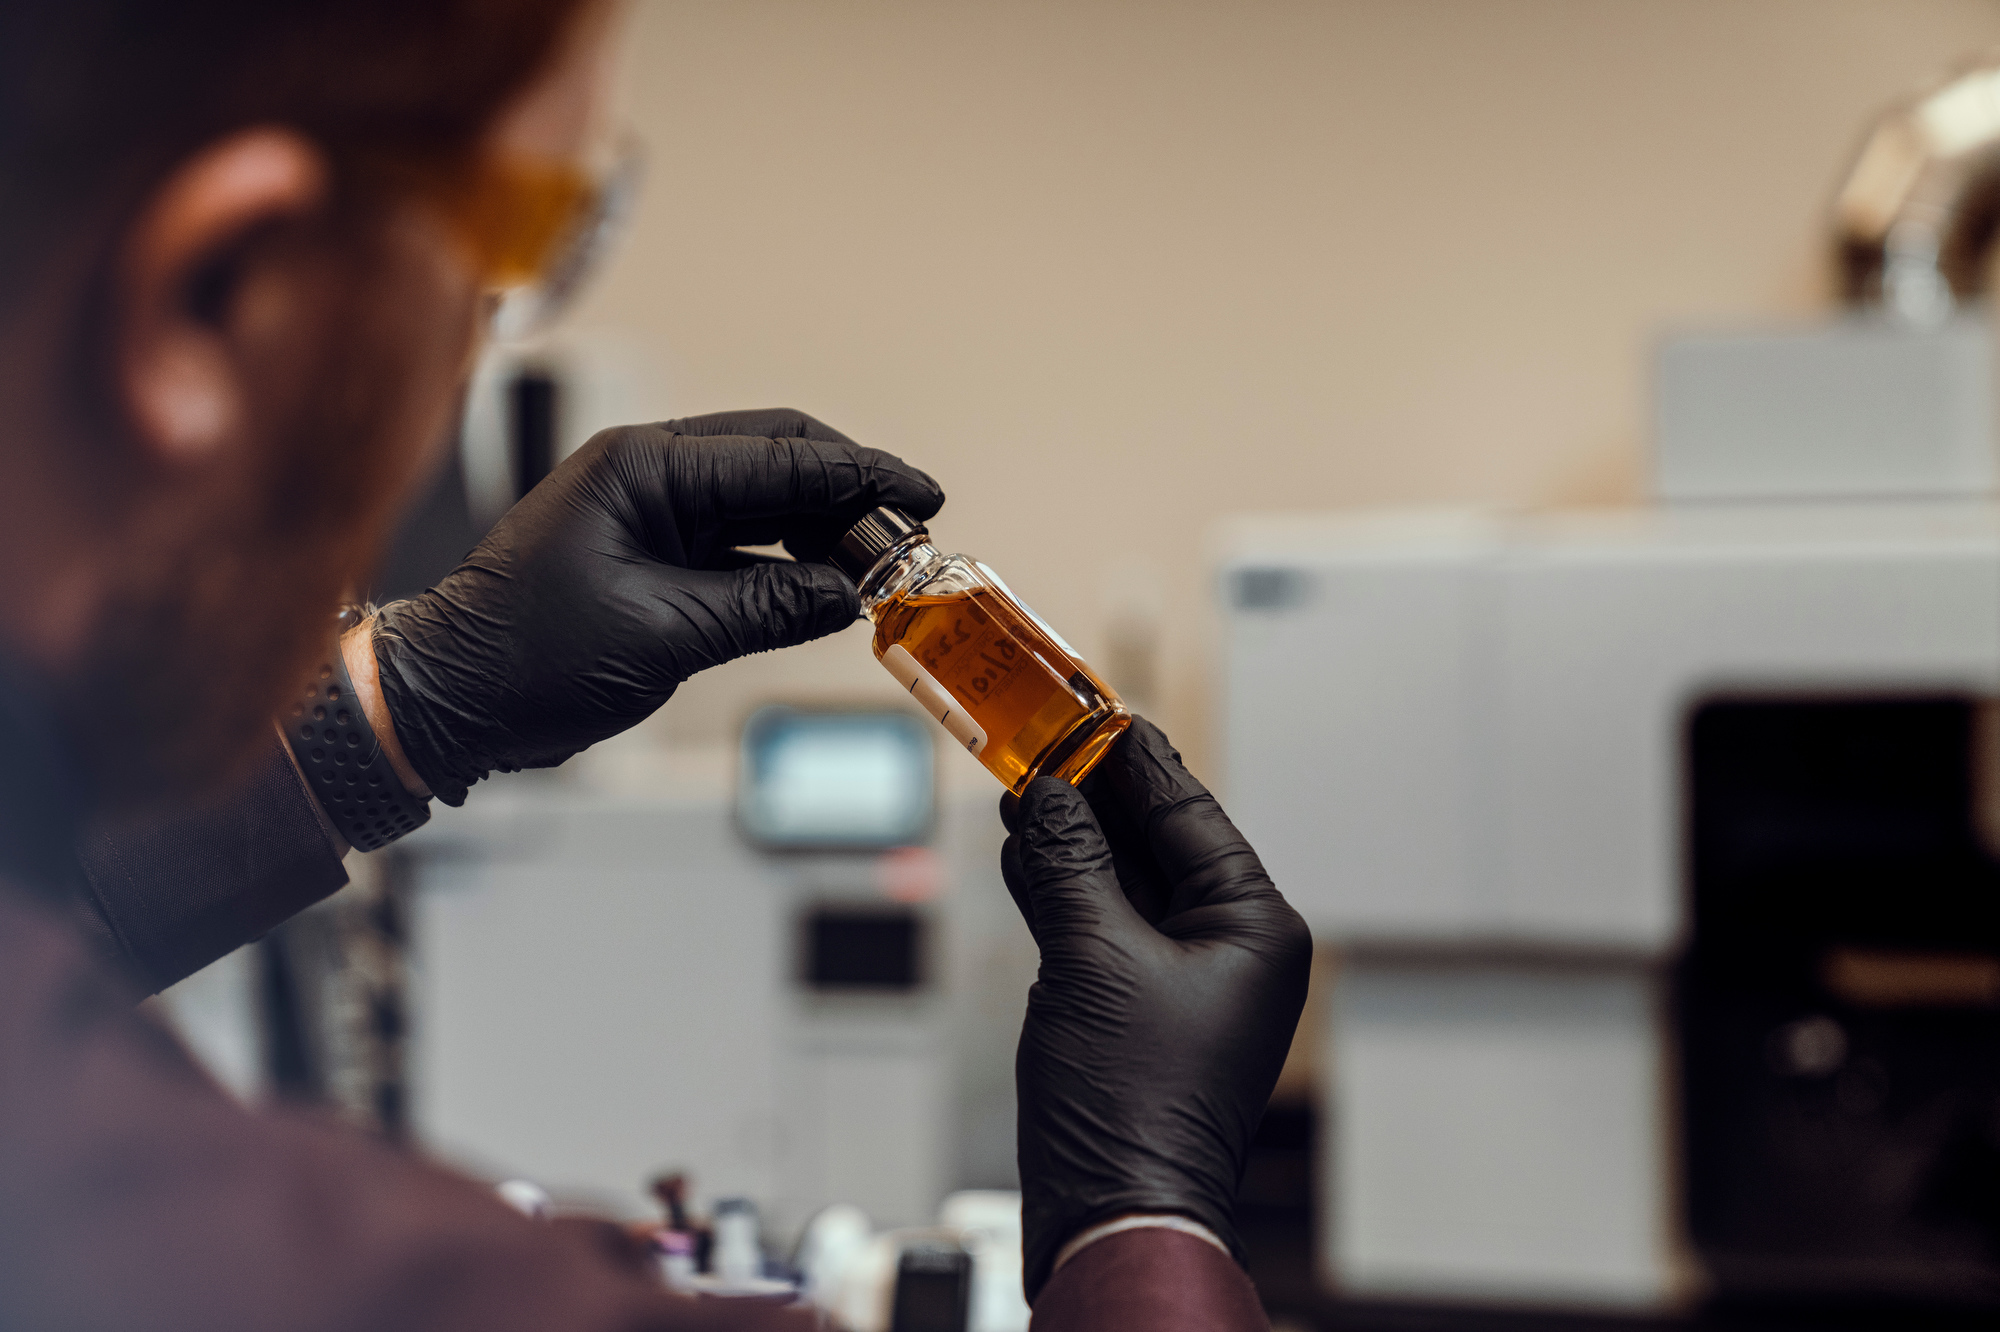 A chemist holding a chemical sample at a lab in Houston, Texas is photographed by Houston industrial photographer, Todd Spoth.